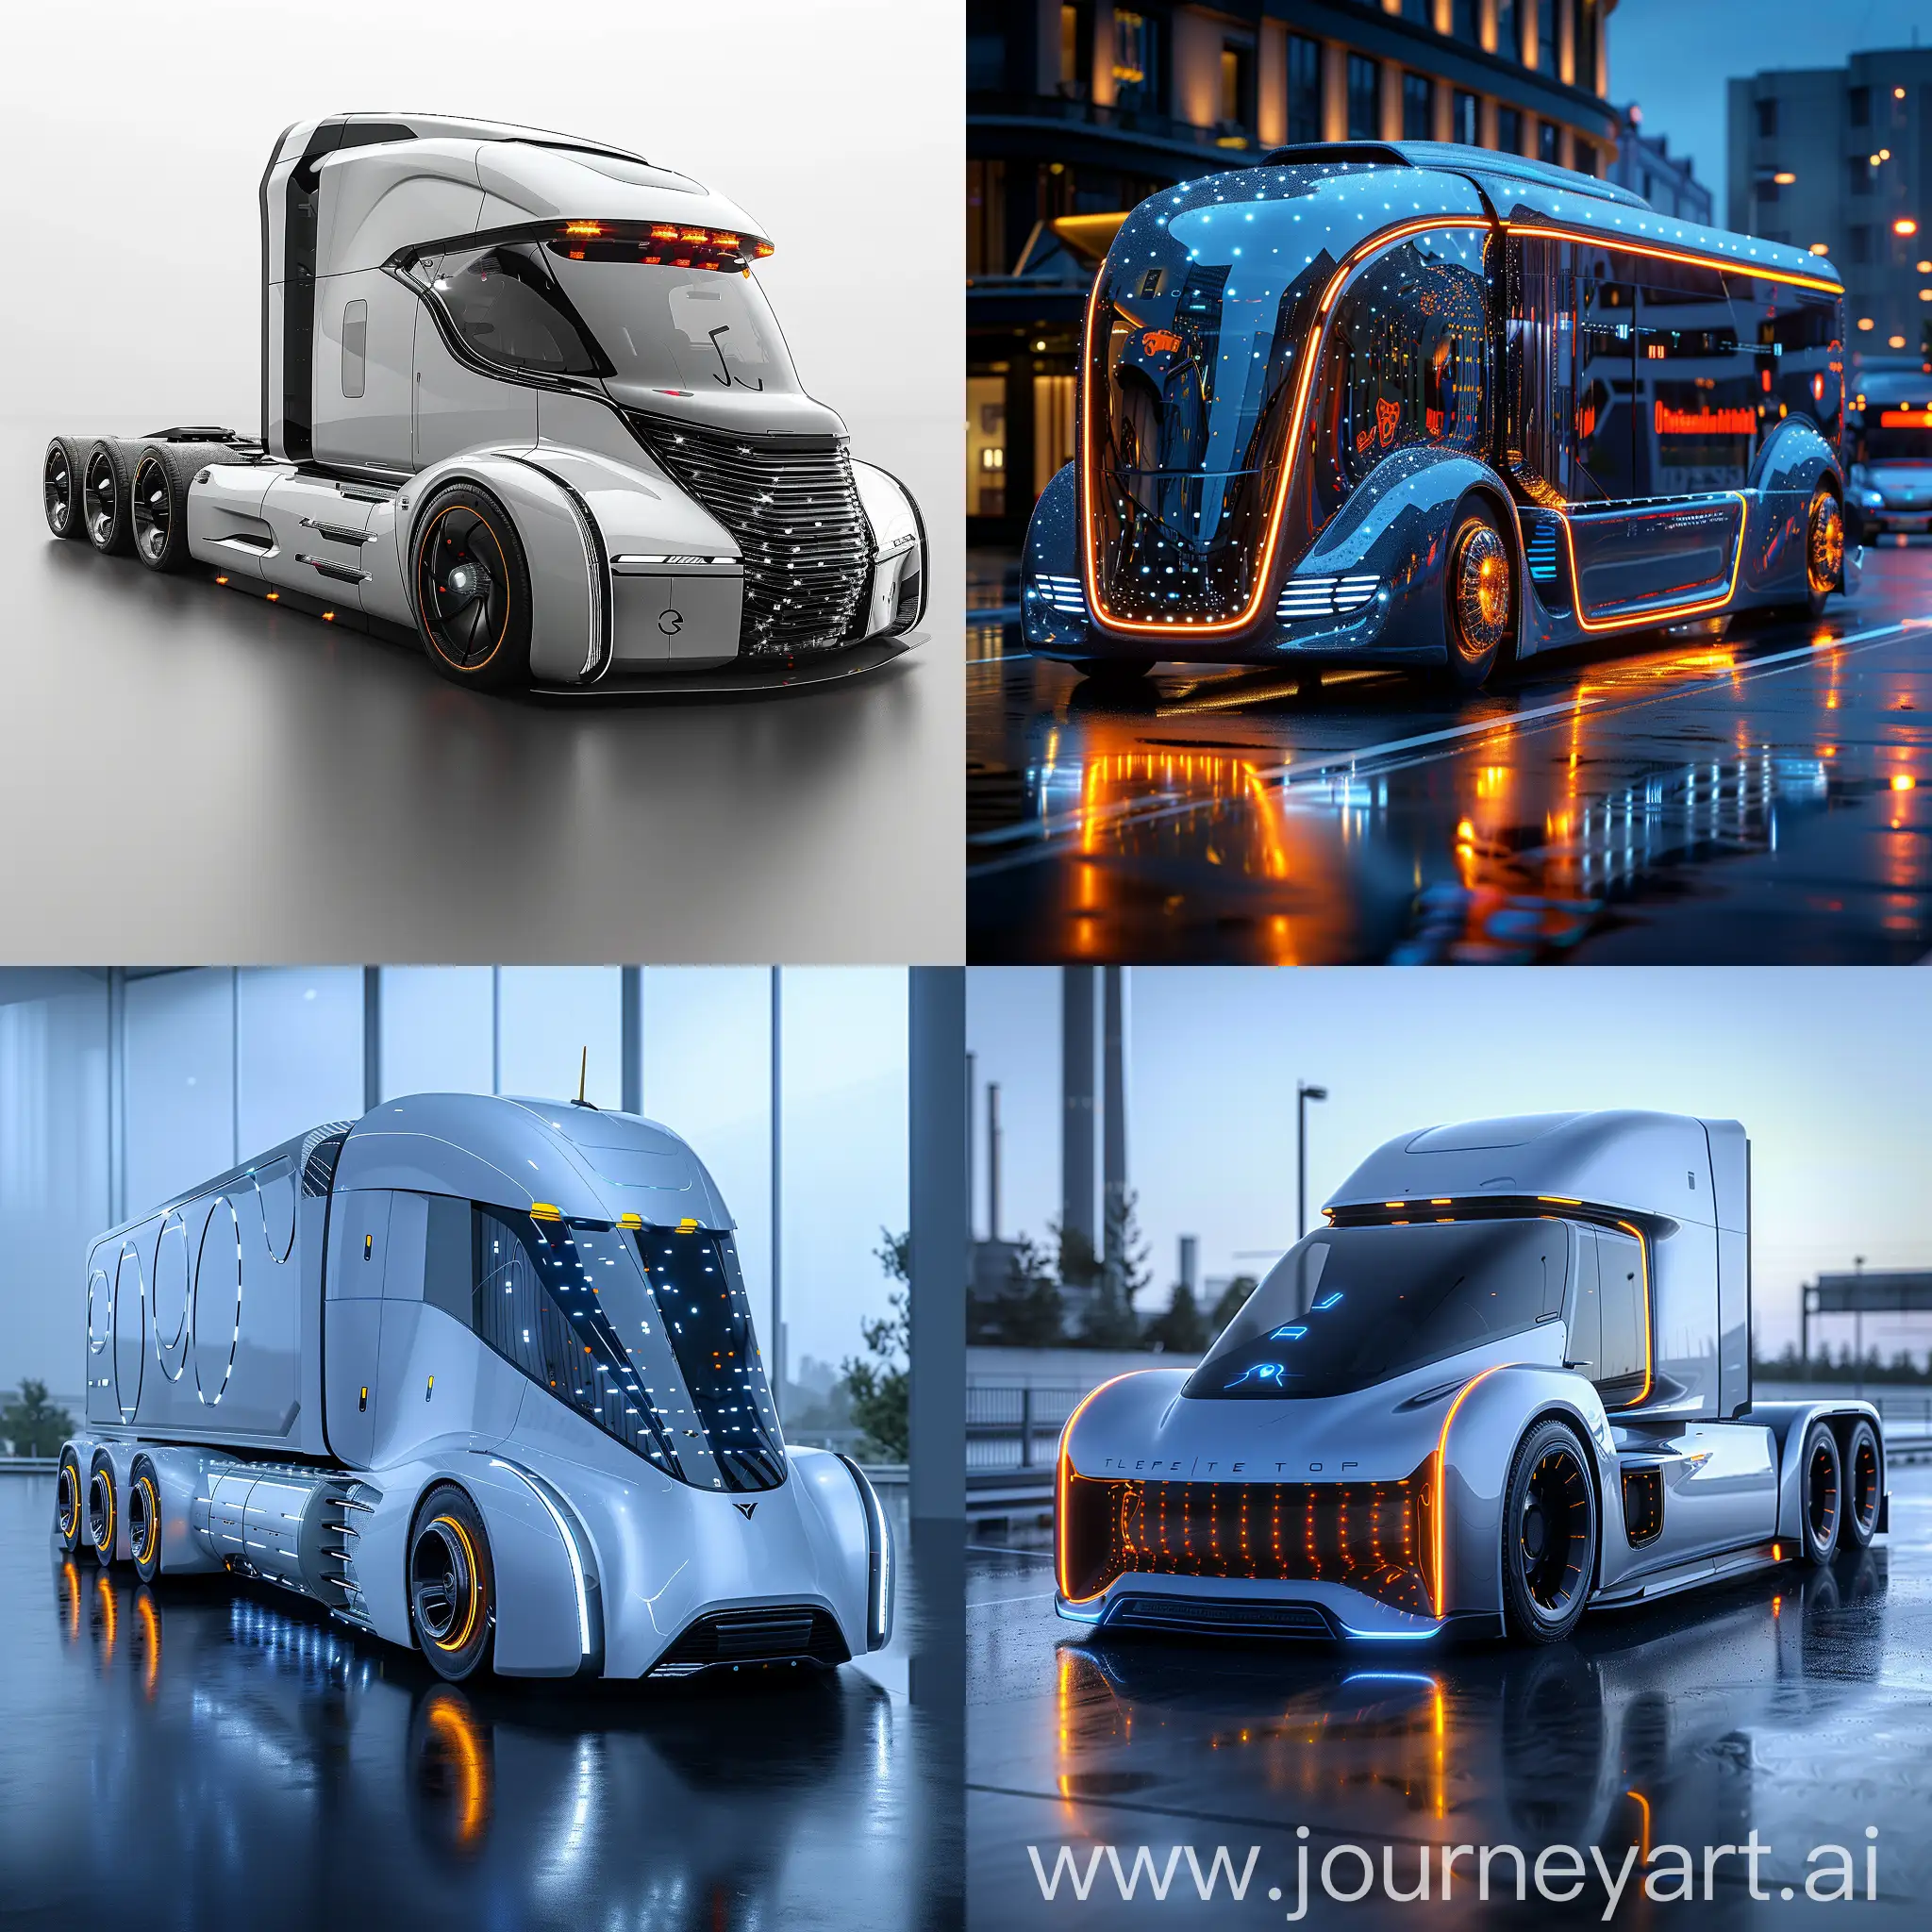 Futuristic truck, Autonomous Driving, Electric Powertrain, Advanced Connectivity, AI Integration, Biometric Security, Augmented Reality Displays, Self-Healing Materials, Energy Harvesting, Modular Design, Health Monitoring Systems, Sleek Aerodynamics, LED Lighting, Digital Grille, Transparent Panels, Holographic Displays, Smart Loading Systems, Foldable Structures, Interactive Controls, Illuminated Panels, Magnetic Levitation Suspension, octane render --stylize 1000